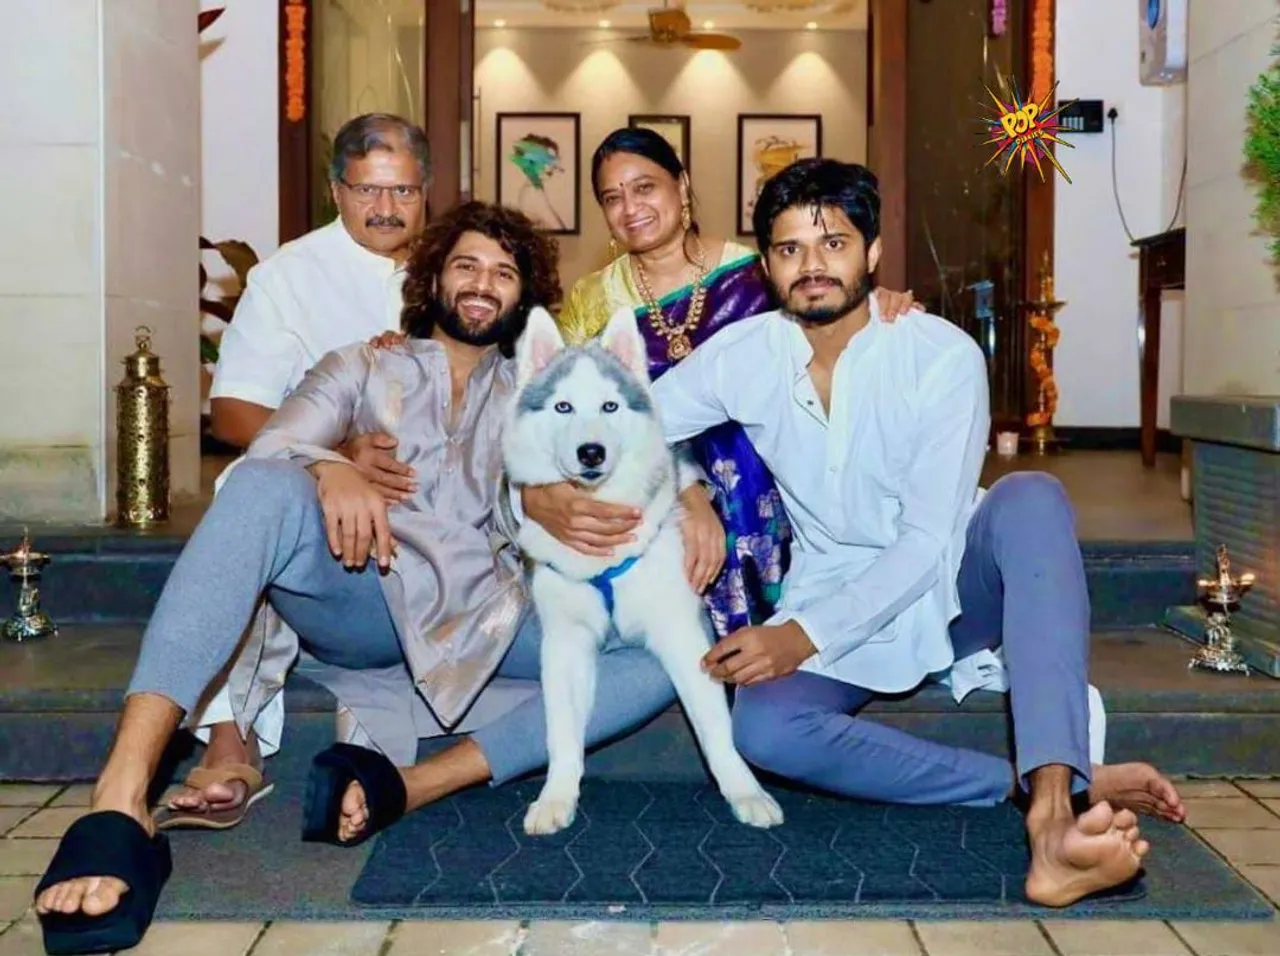 Watch the funny video of Vijay Deverakonda and family fleeing in a private jet